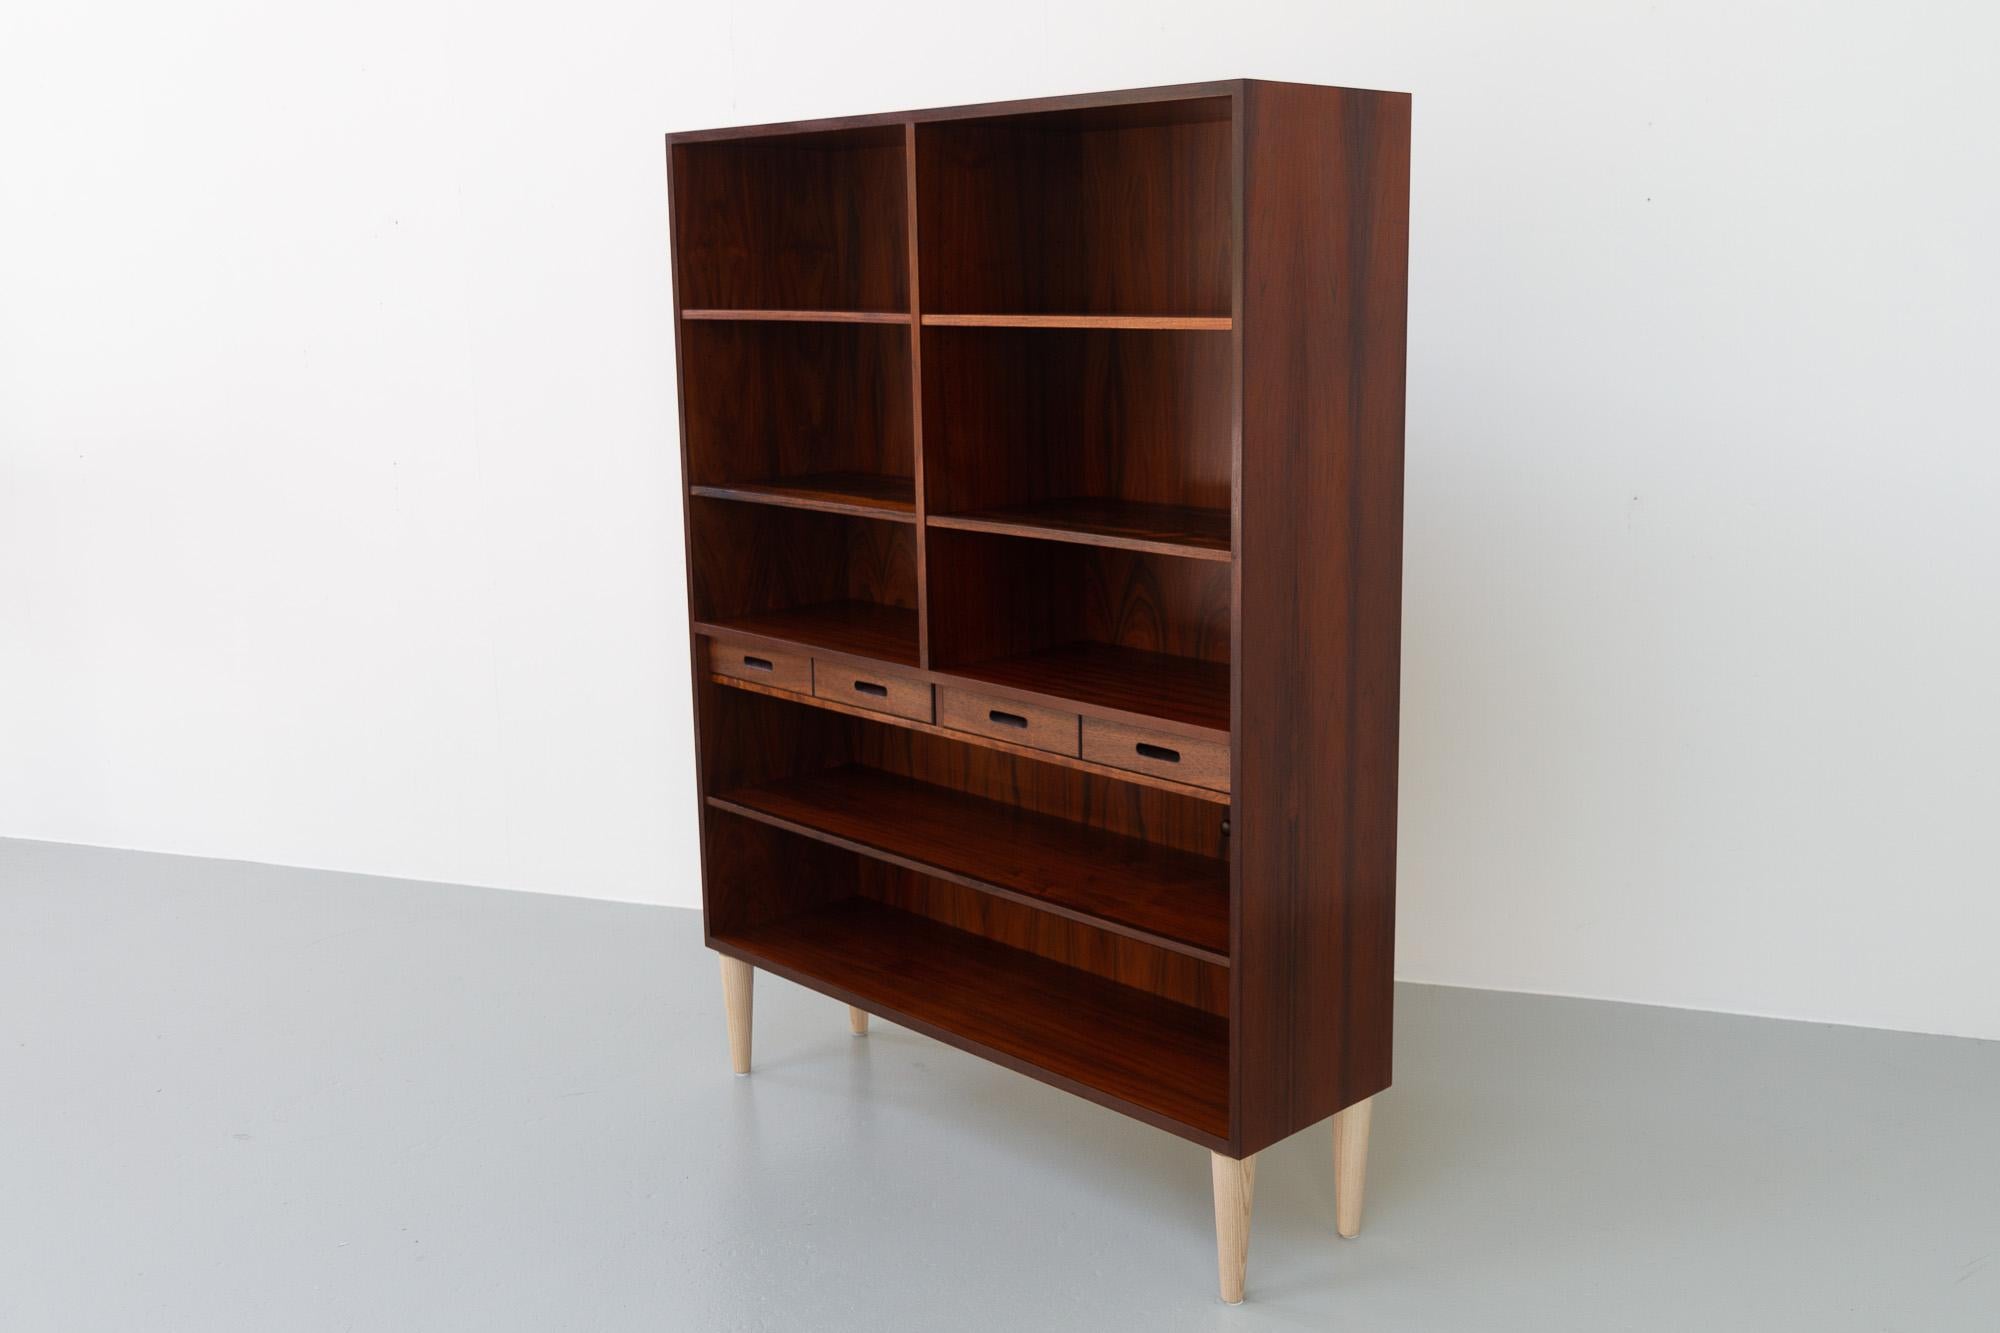 Mid-century Modern Danish Rosewood Bookcase by Kai Winding, 1960s.
Elegant and beautiful Scandinavian Modern bookcase designed by Danish architect Kai Winding for Hundevad & Co. Denmark in the 1960s.
Five adjustable shelves and four small drawers.